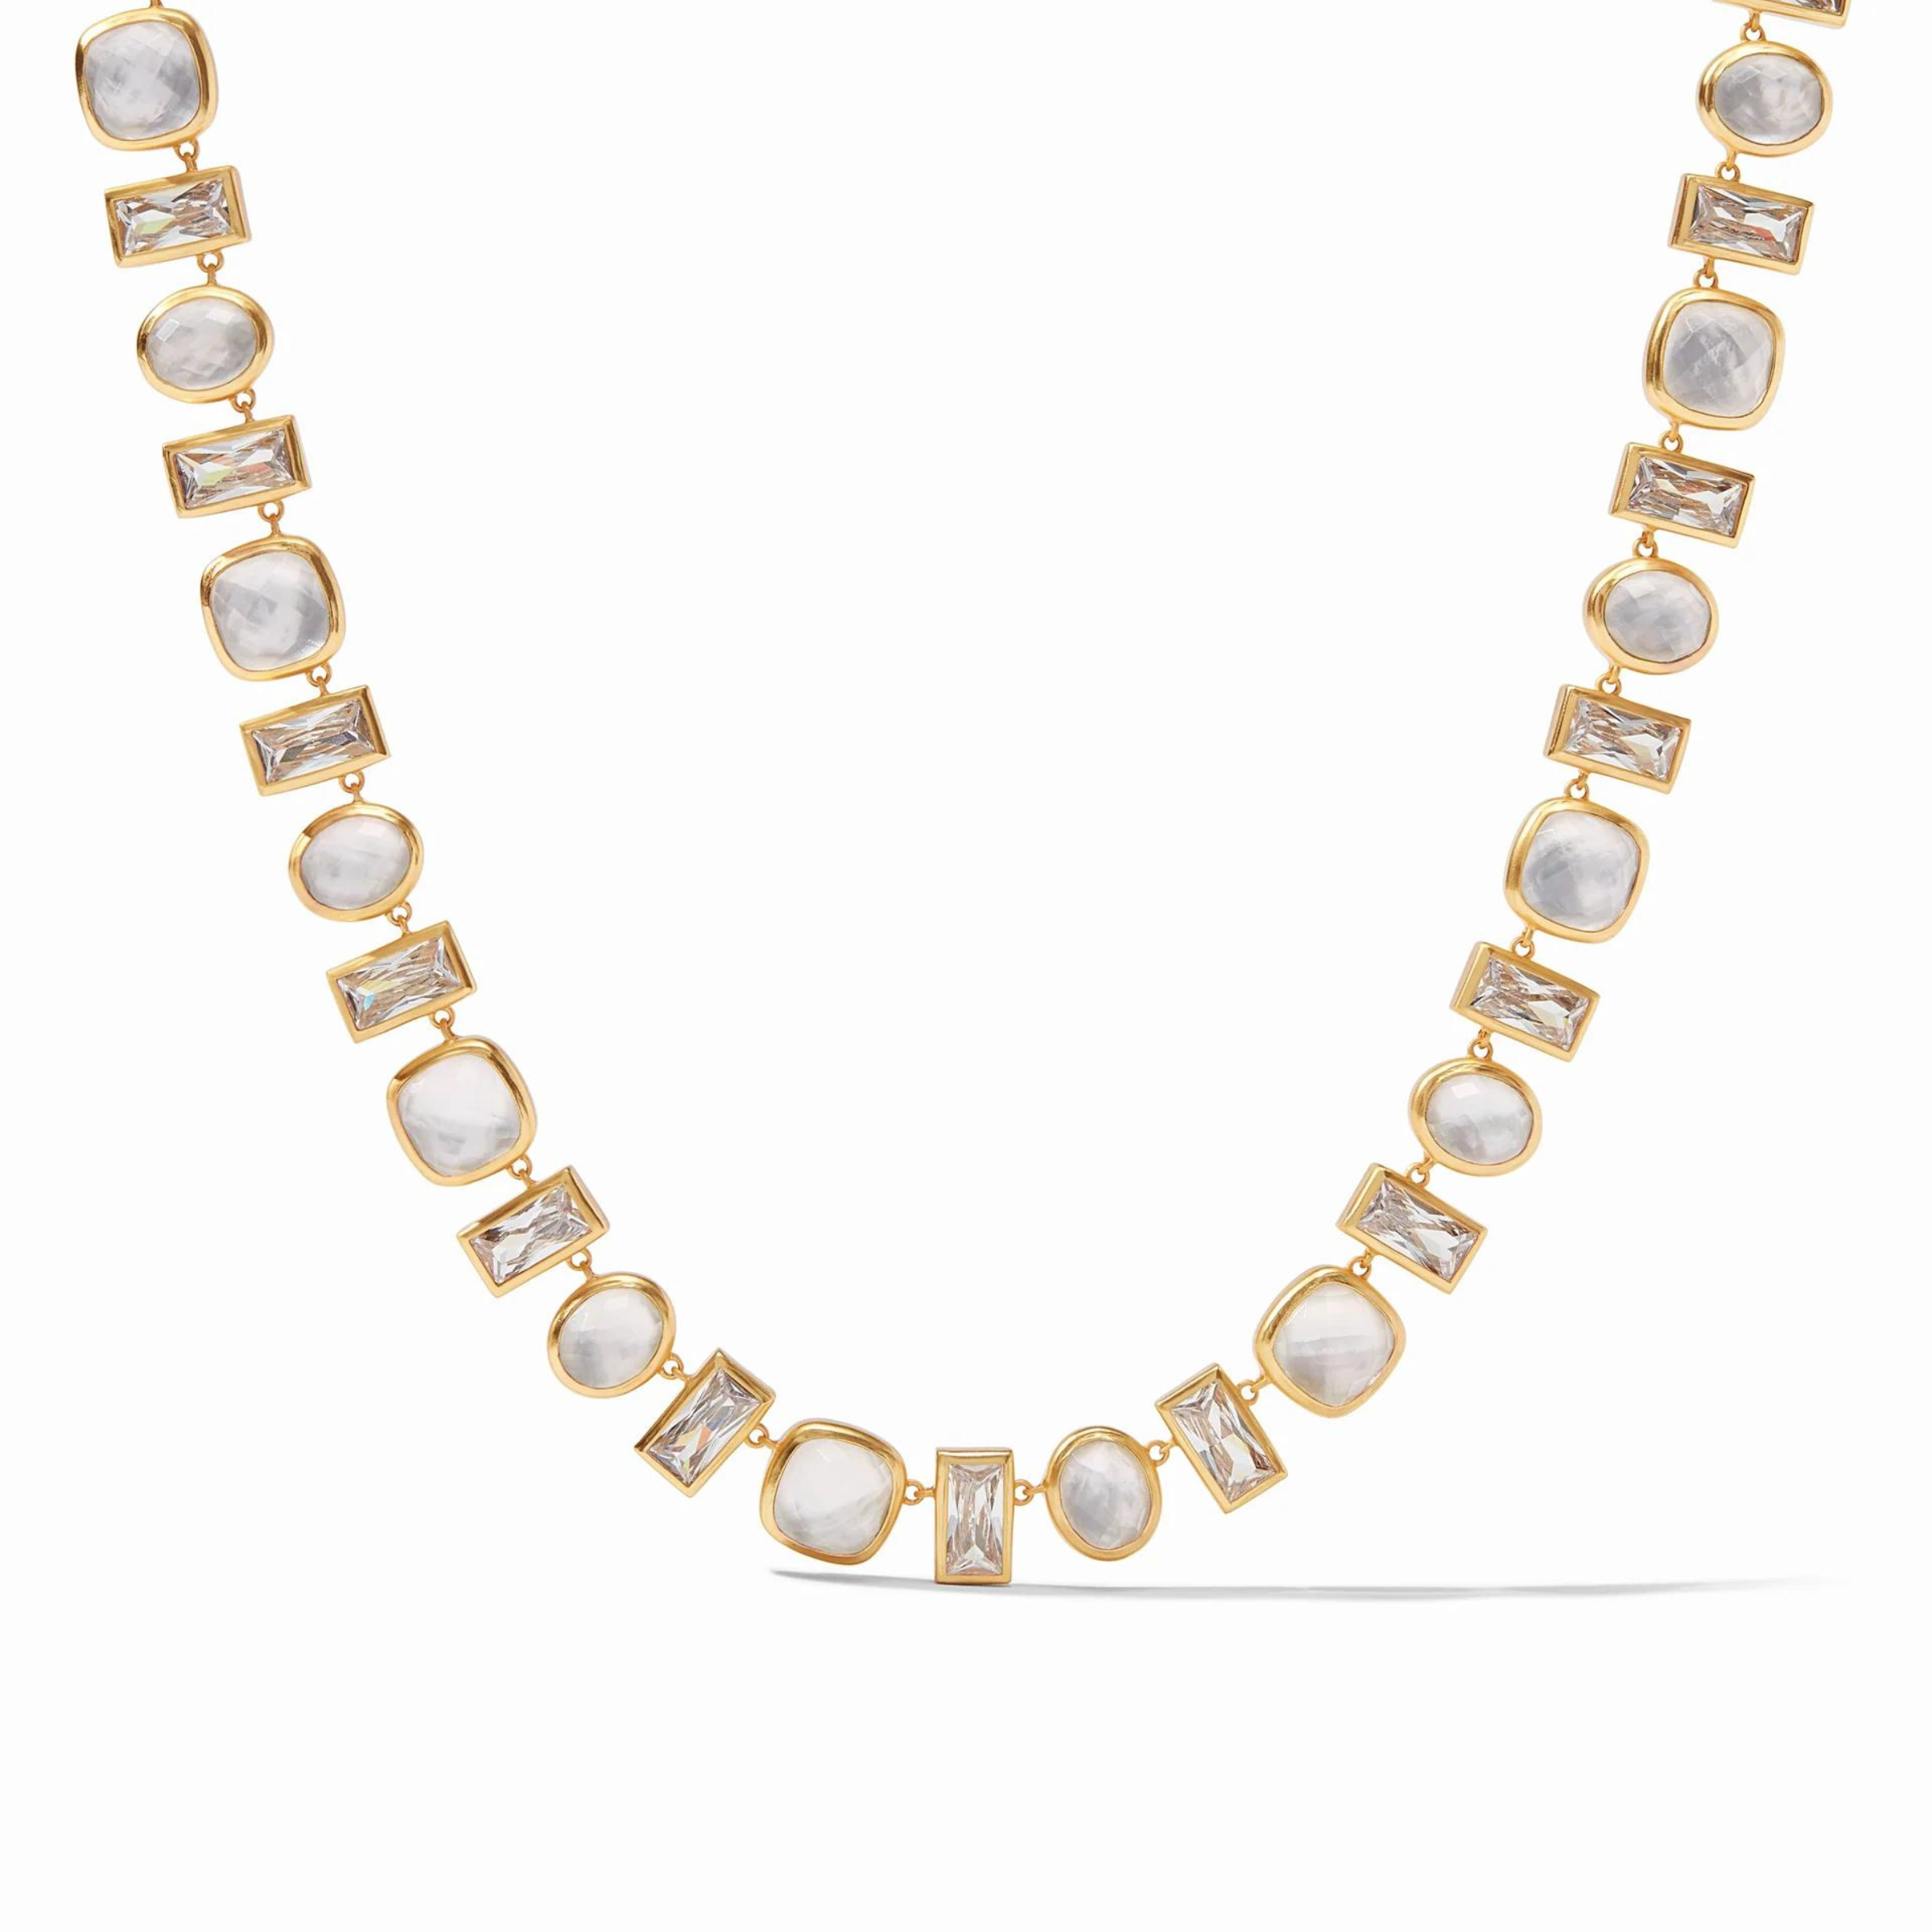 Gold necklace with clear, rectangle crystals and square, iridescent clear crystals linked together. This necklace is pictured on a white background. 